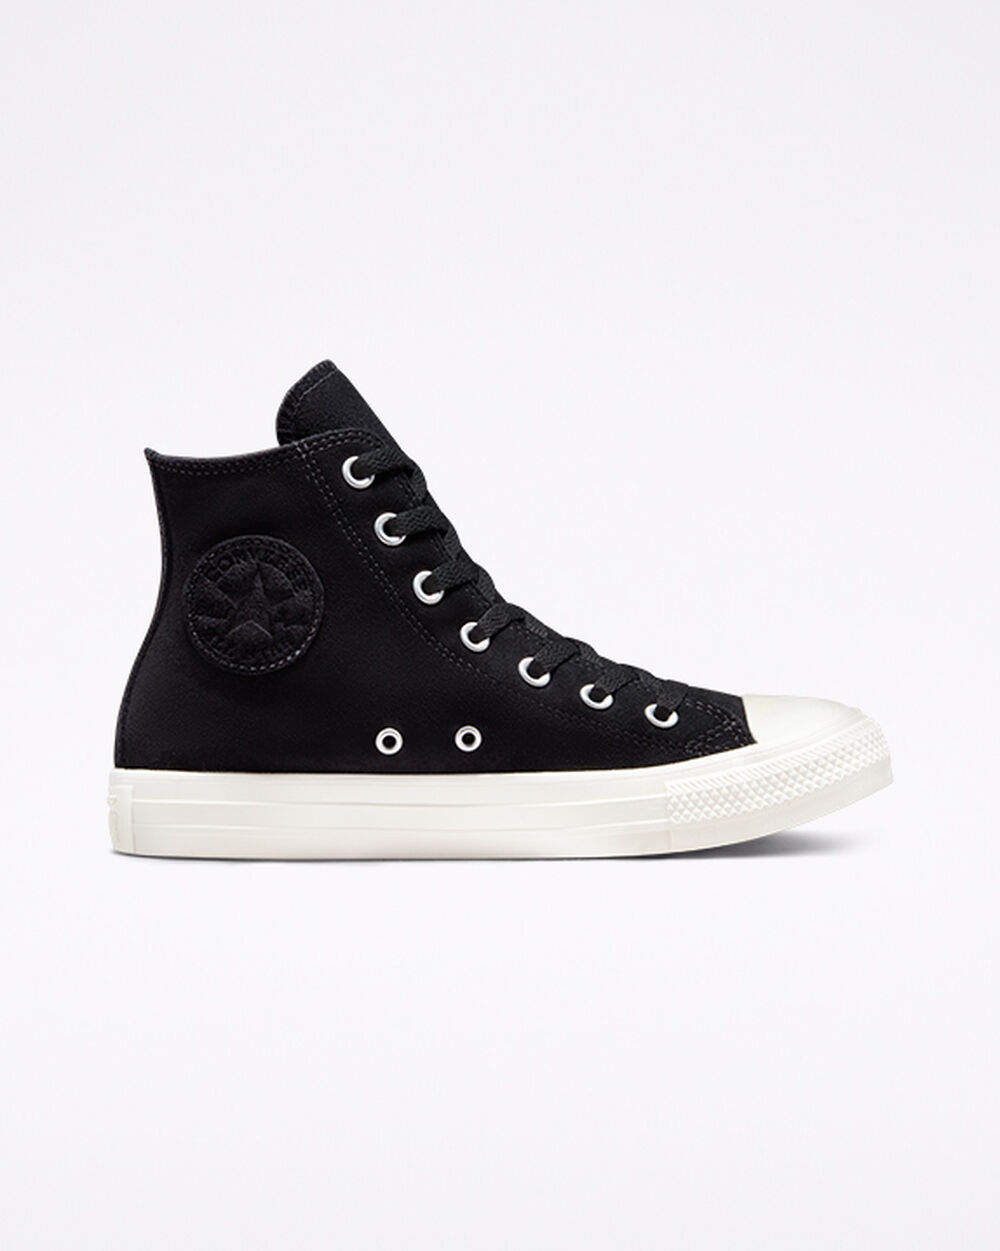 Tenis Converse Chuck Taylor All Star Mujer Negros Blancos | Mexico-23466